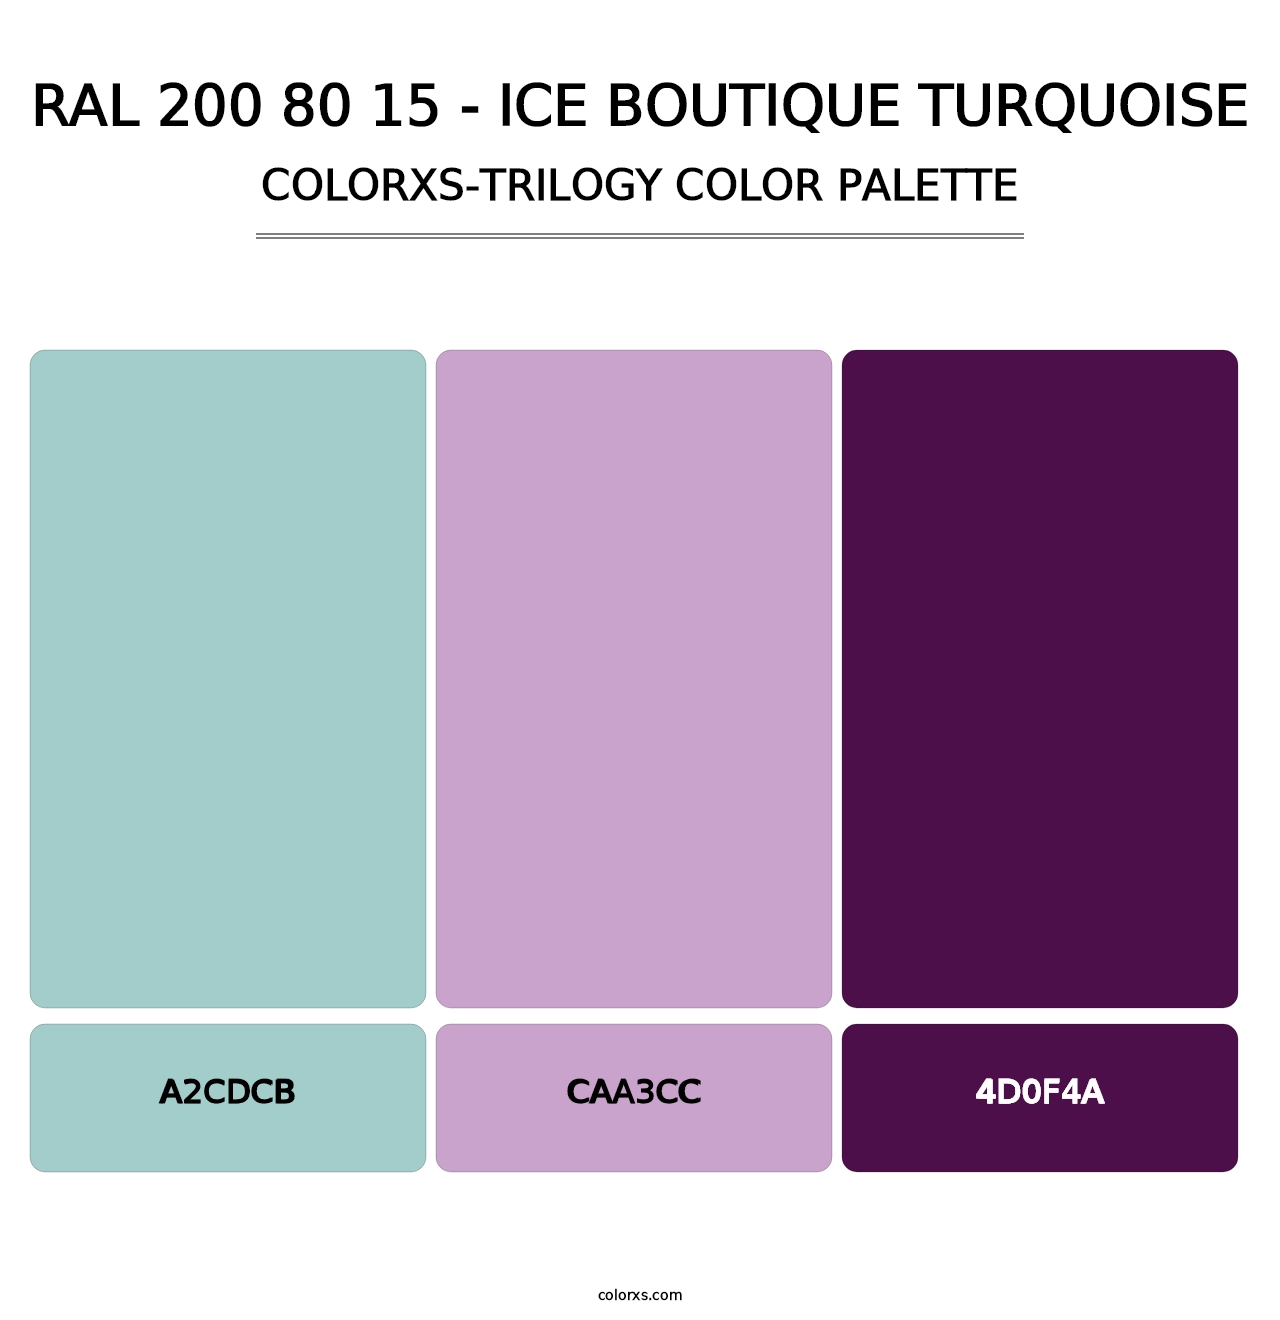 RAL 200 80 15 - Ice Boutique Turquoise - Colorxs Trilogy Palette